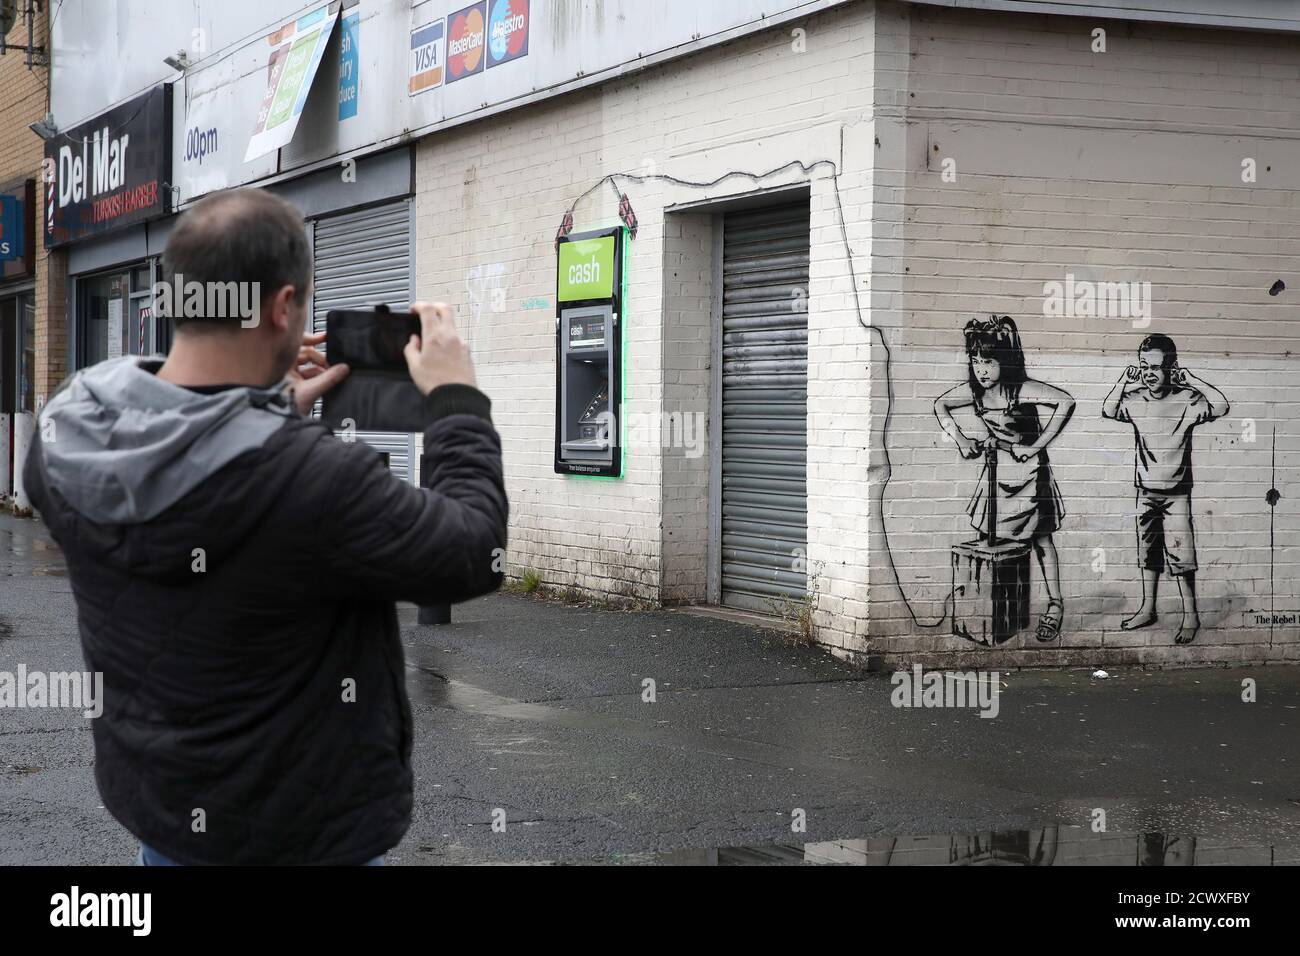 A man takes a picture of the art work by graffiti artist The Rebel Bear which has recently appeared showing two children about to detonate explosives at the cashline at a shopping centre in Cambuslang. Over recent months the artist has drawn several coronavirus related drawings in Glasgow. Stock Photo